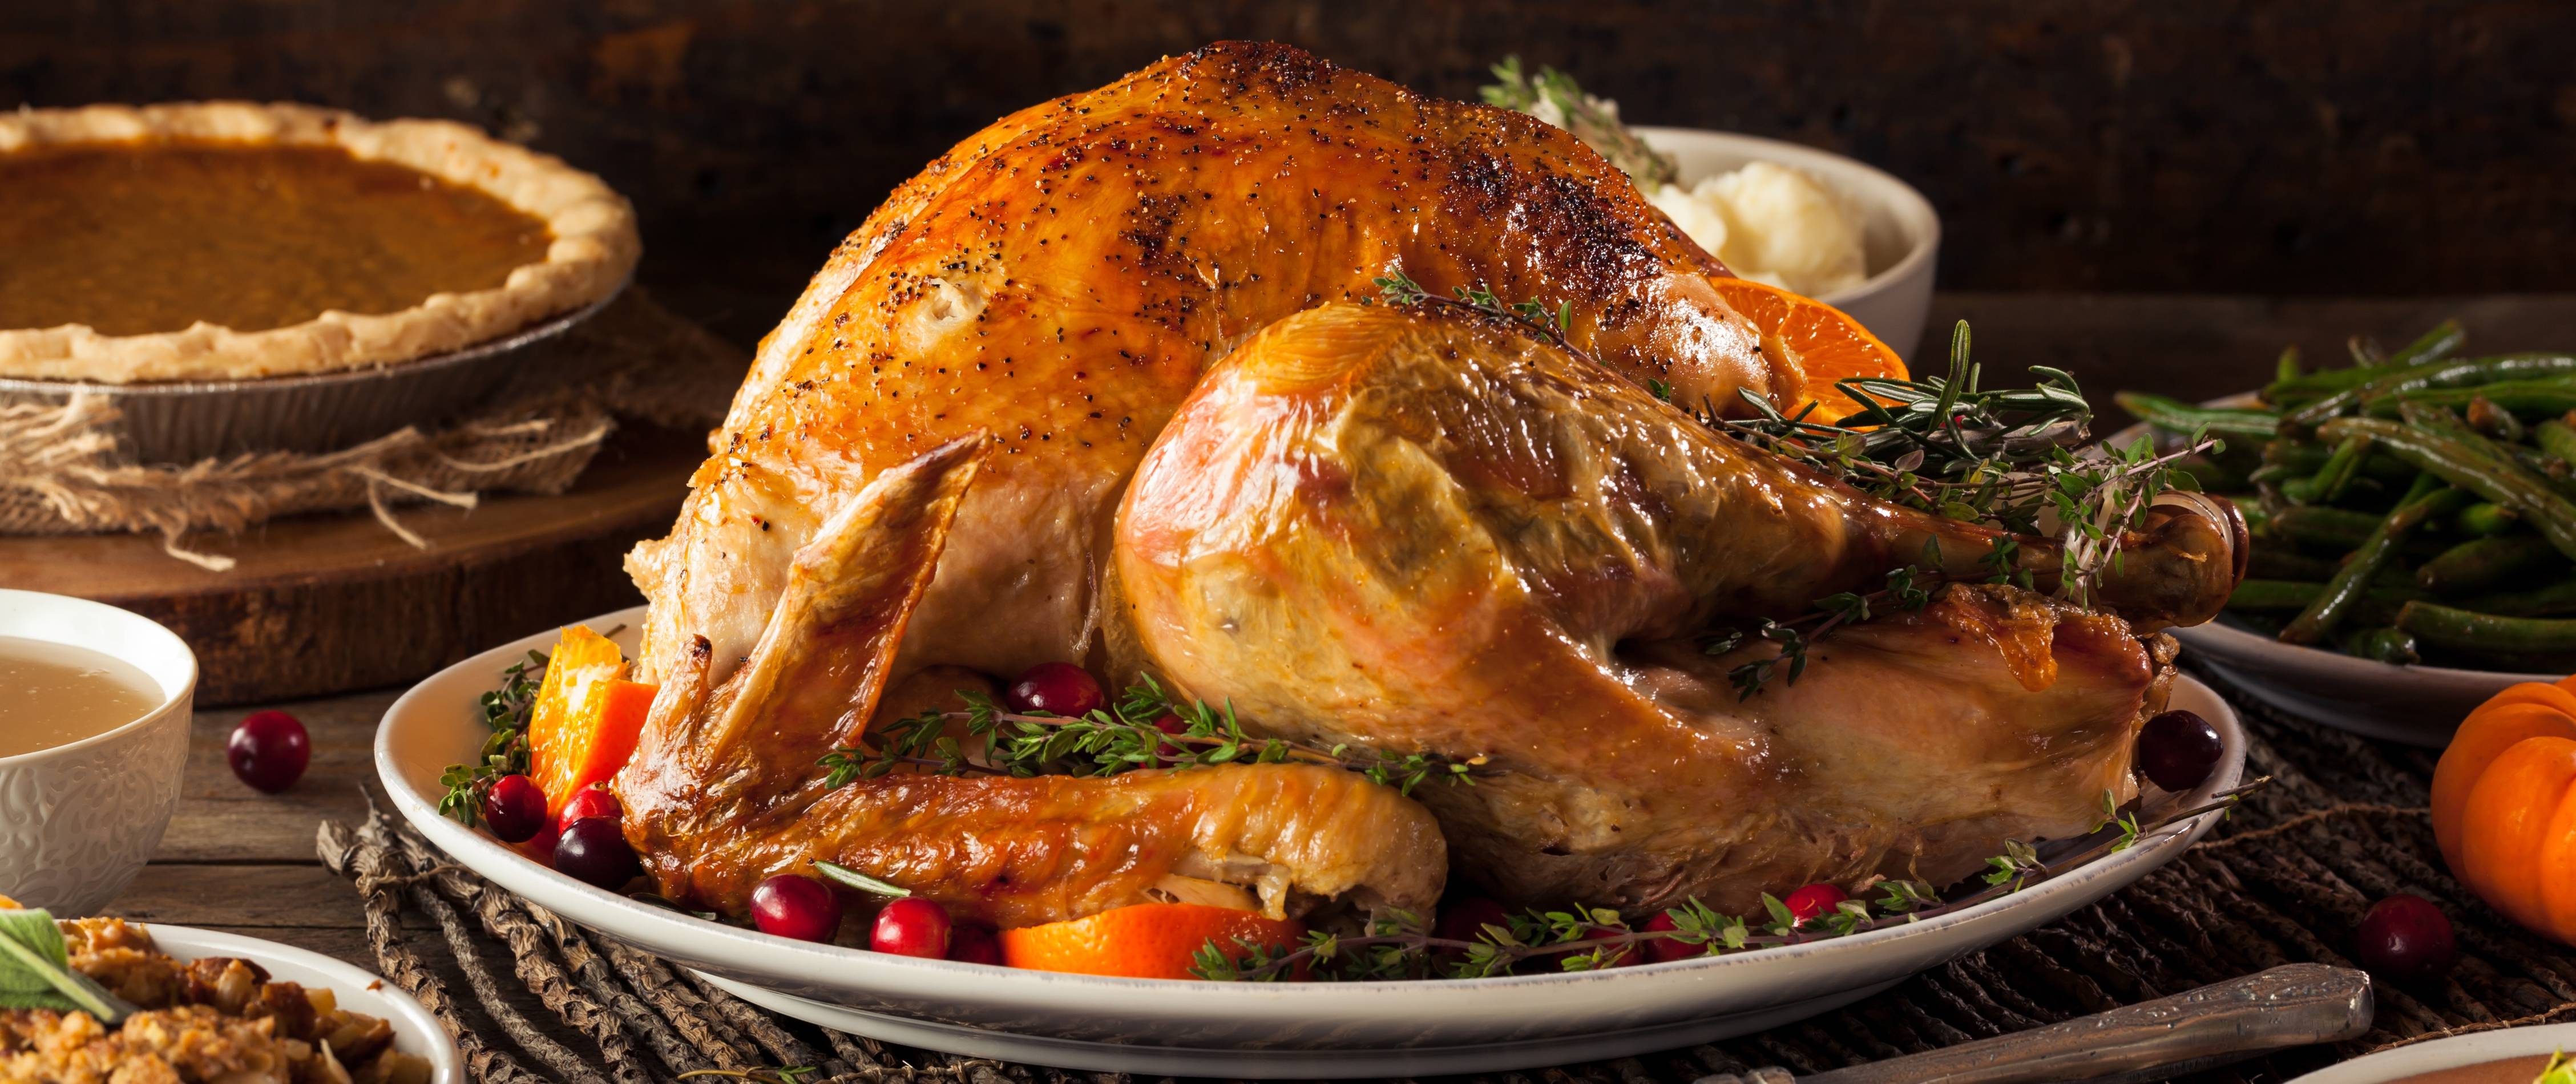 Where To Have Thanksgiving Dinner In DC